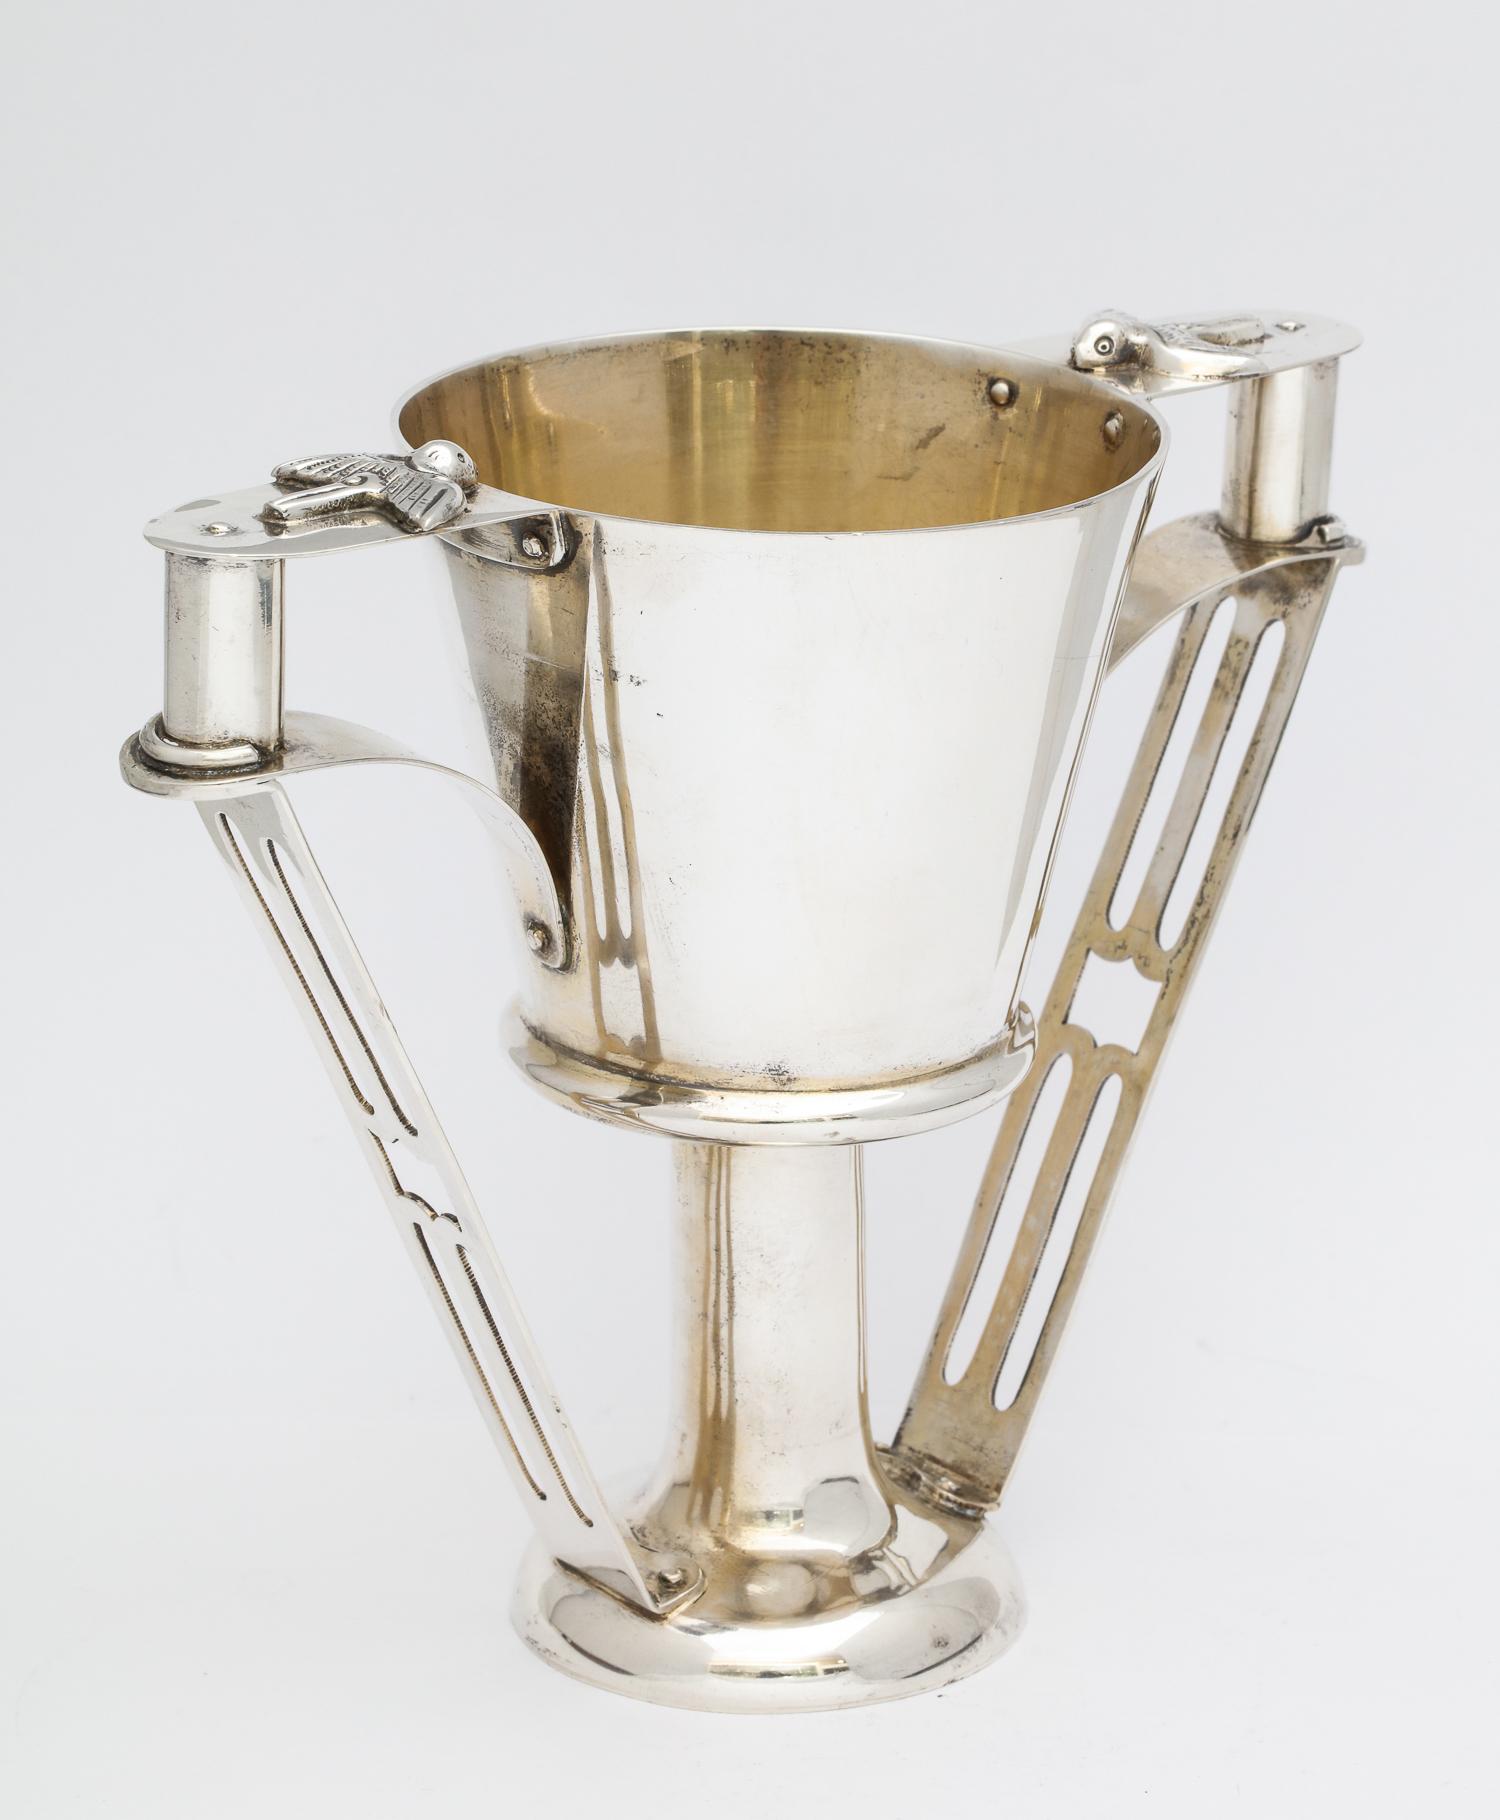 Edwardian, Arts & Crafts, sterling silver two-handled cup, Chester, England, 1906, George Nathan and Ridley Hayes - makers. Pierced handles are topped with birds. Gilded interior. Measures: 5 3/4 inches high x 6 3/4 wide (handle to handle) x 3 1/2